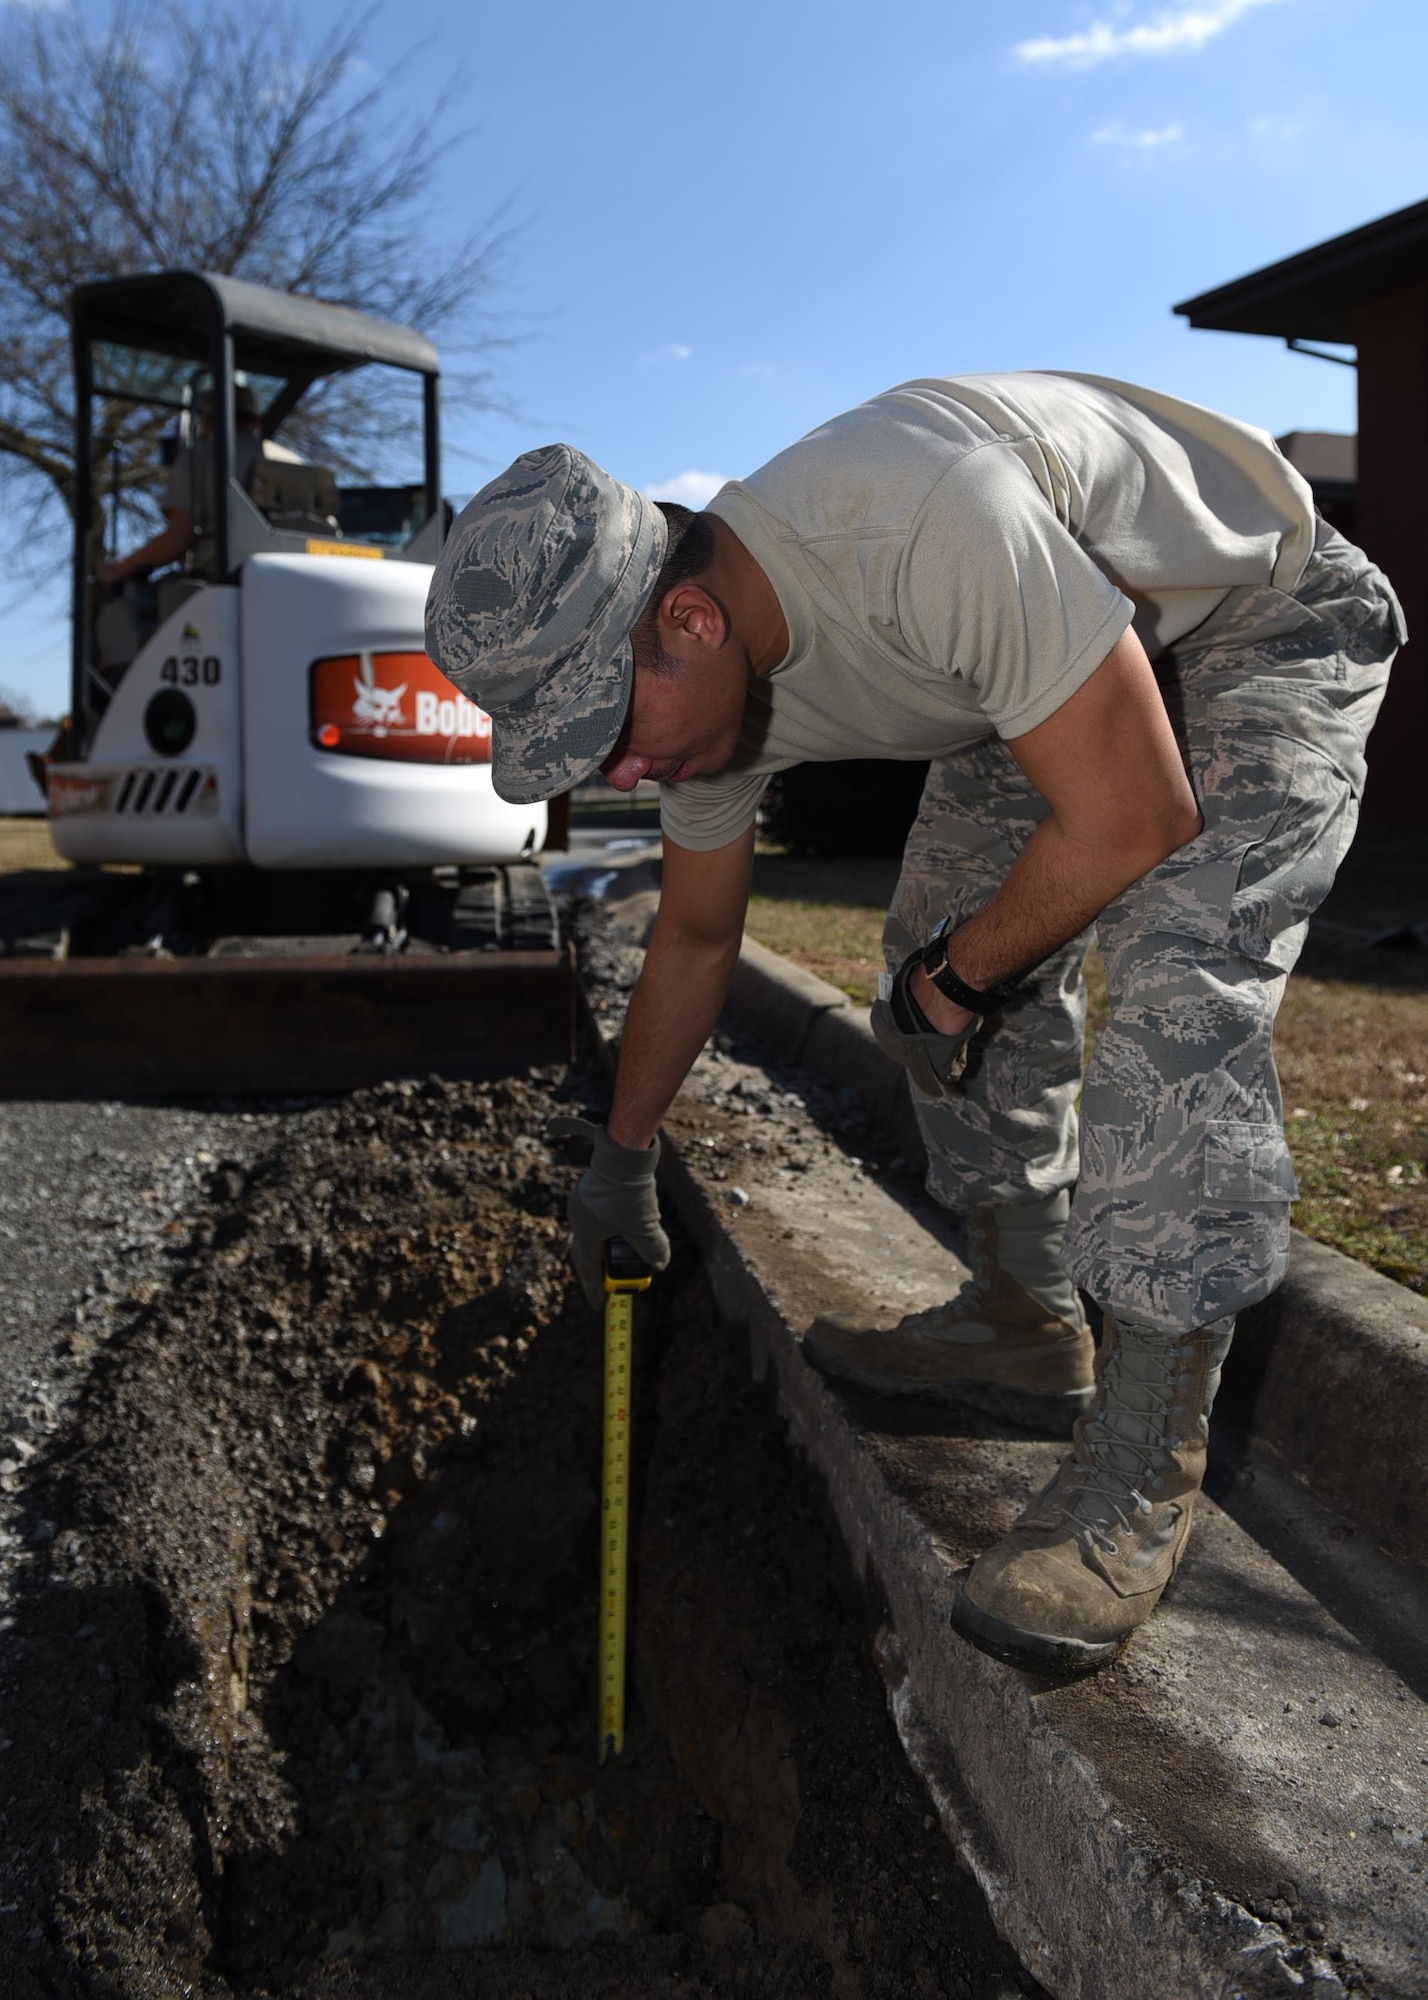 U.S. Air Force Senior Airman Allen Arceo, 19th Civil Engineer Squadron pavement and heavy equipment craftsman, measures the depth of an excavated subbase Jan. 7, 2017, at Little Rock Air Force Base, Ark. Measuring the depth ensures enough material is removed to allow the placement of ballast rock to help strengthen the area of the road. (U.S. Air Force photo by Airman 1st Class Kevin Sommer Giron)